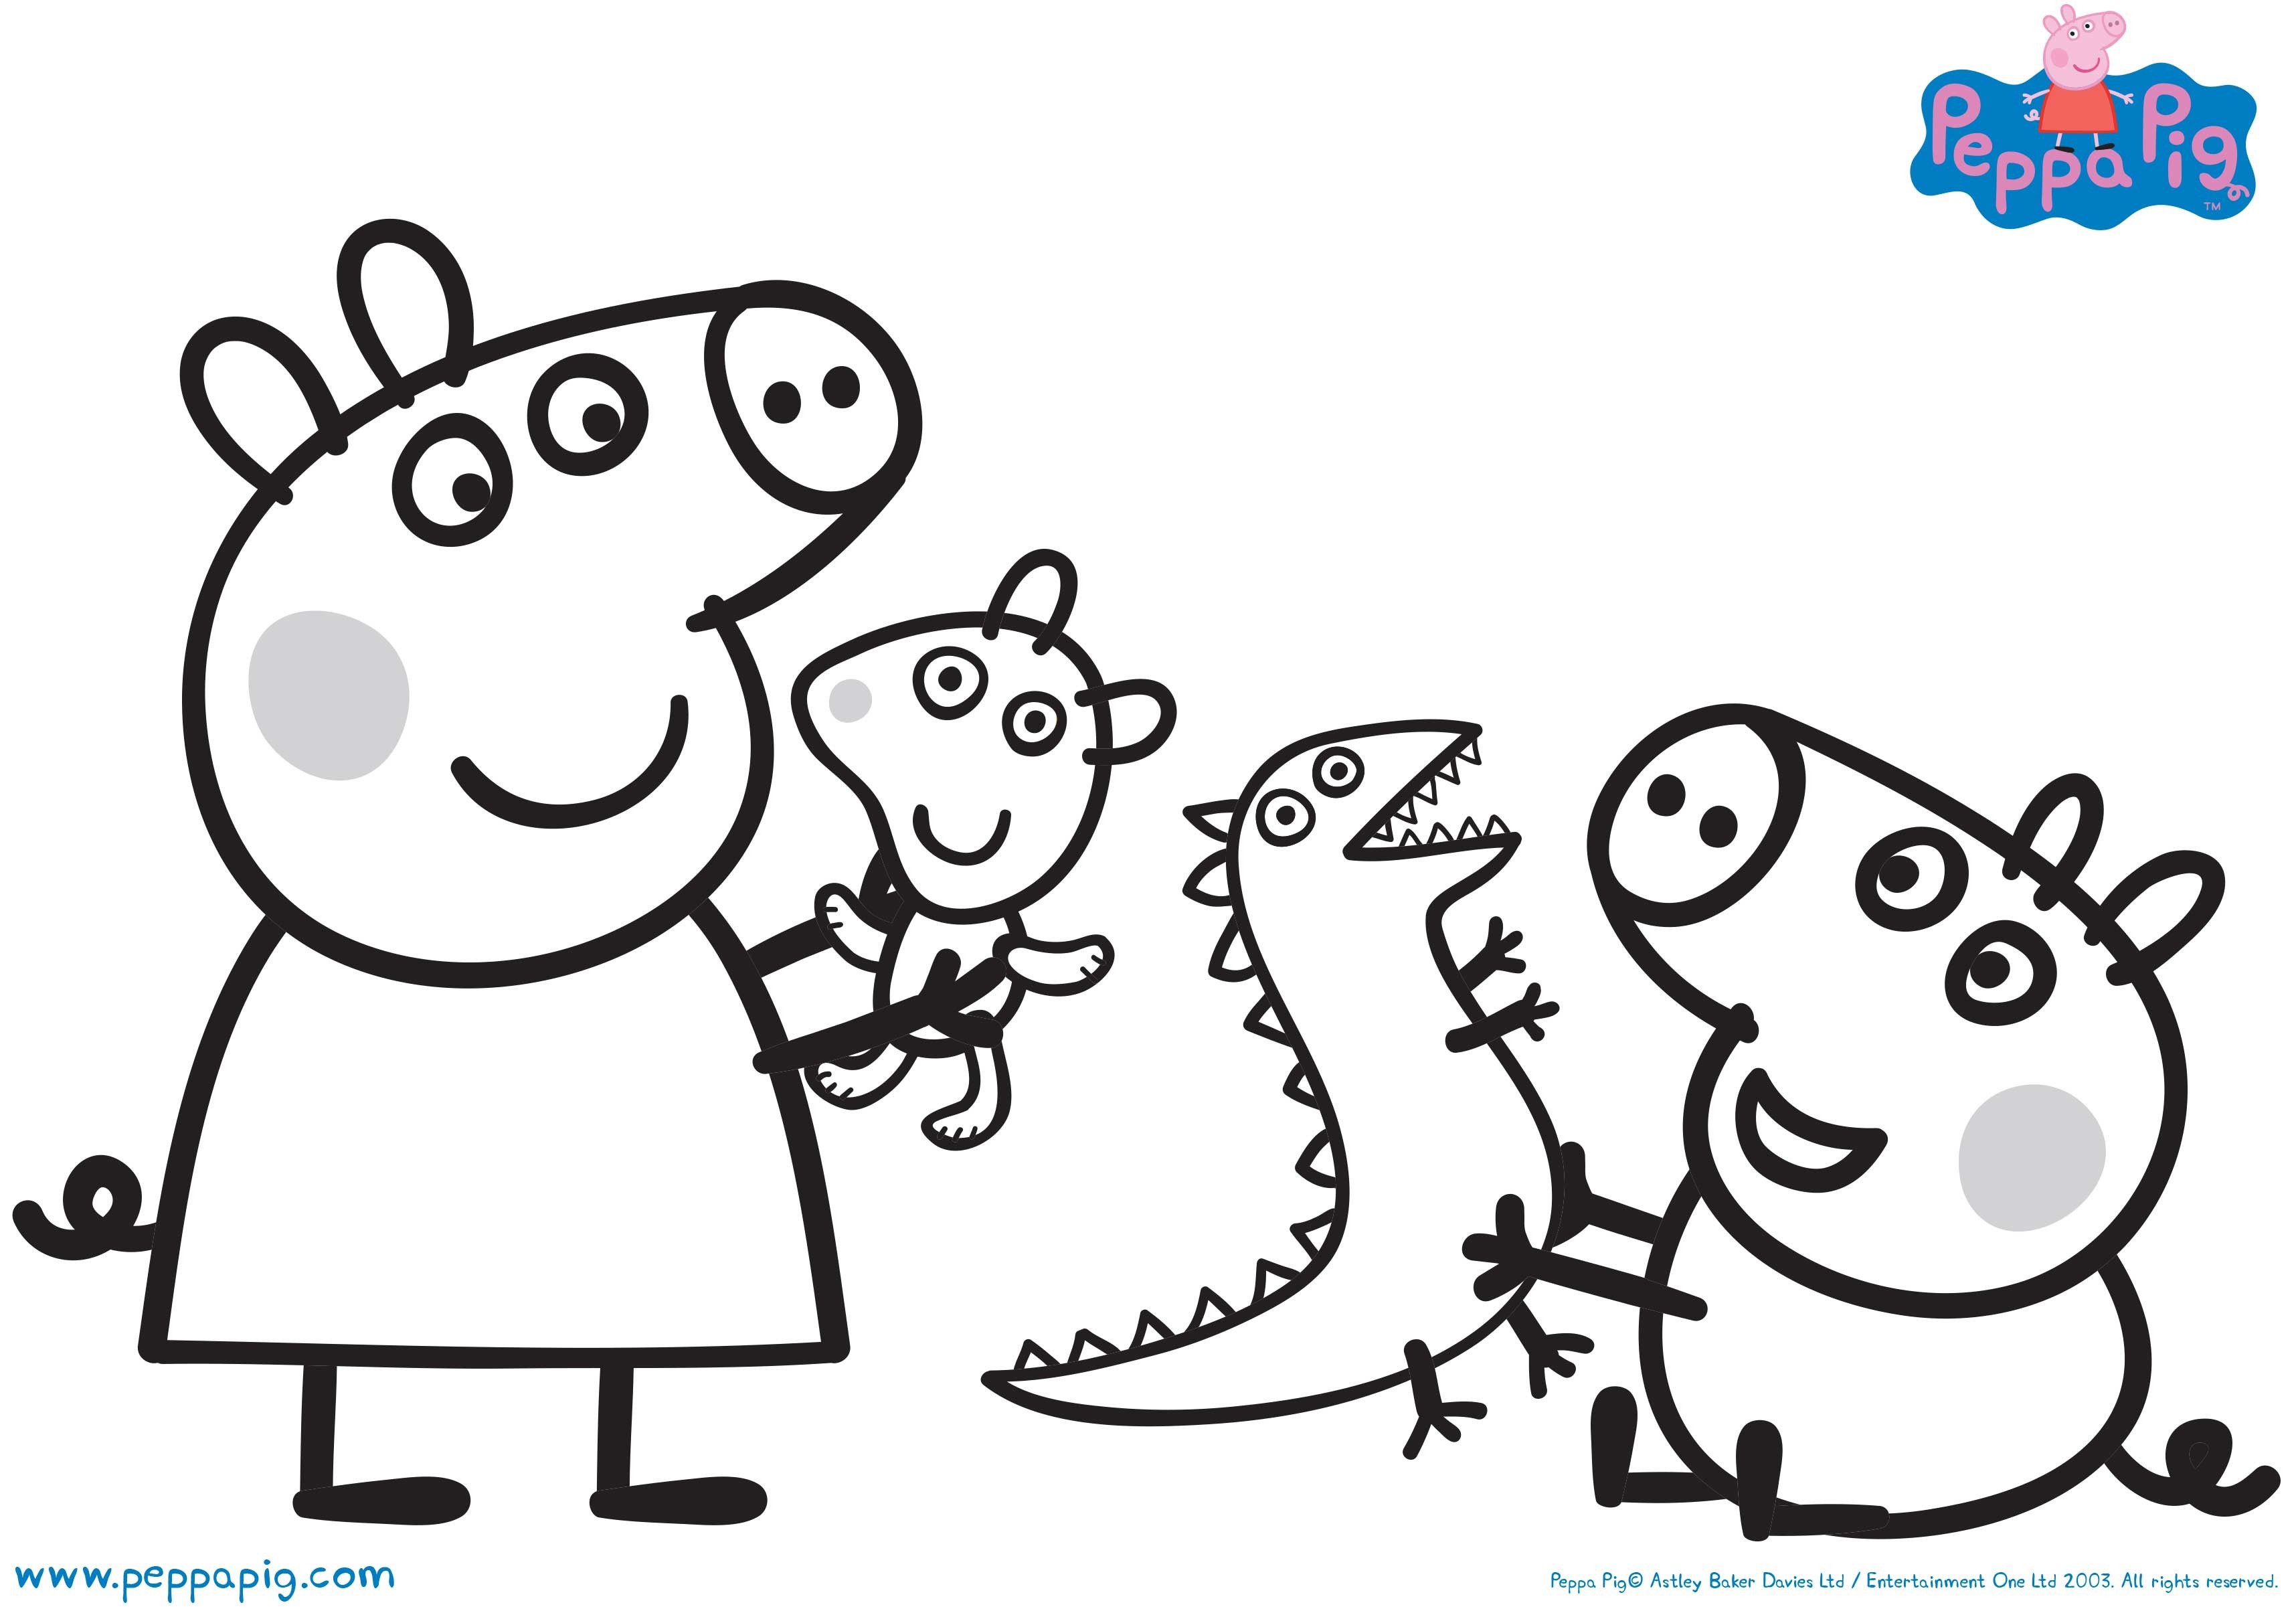 Peppa Pig Coloring Game New Coloring Pages Line Peppa Pig New Free Coloring Pages Printable to